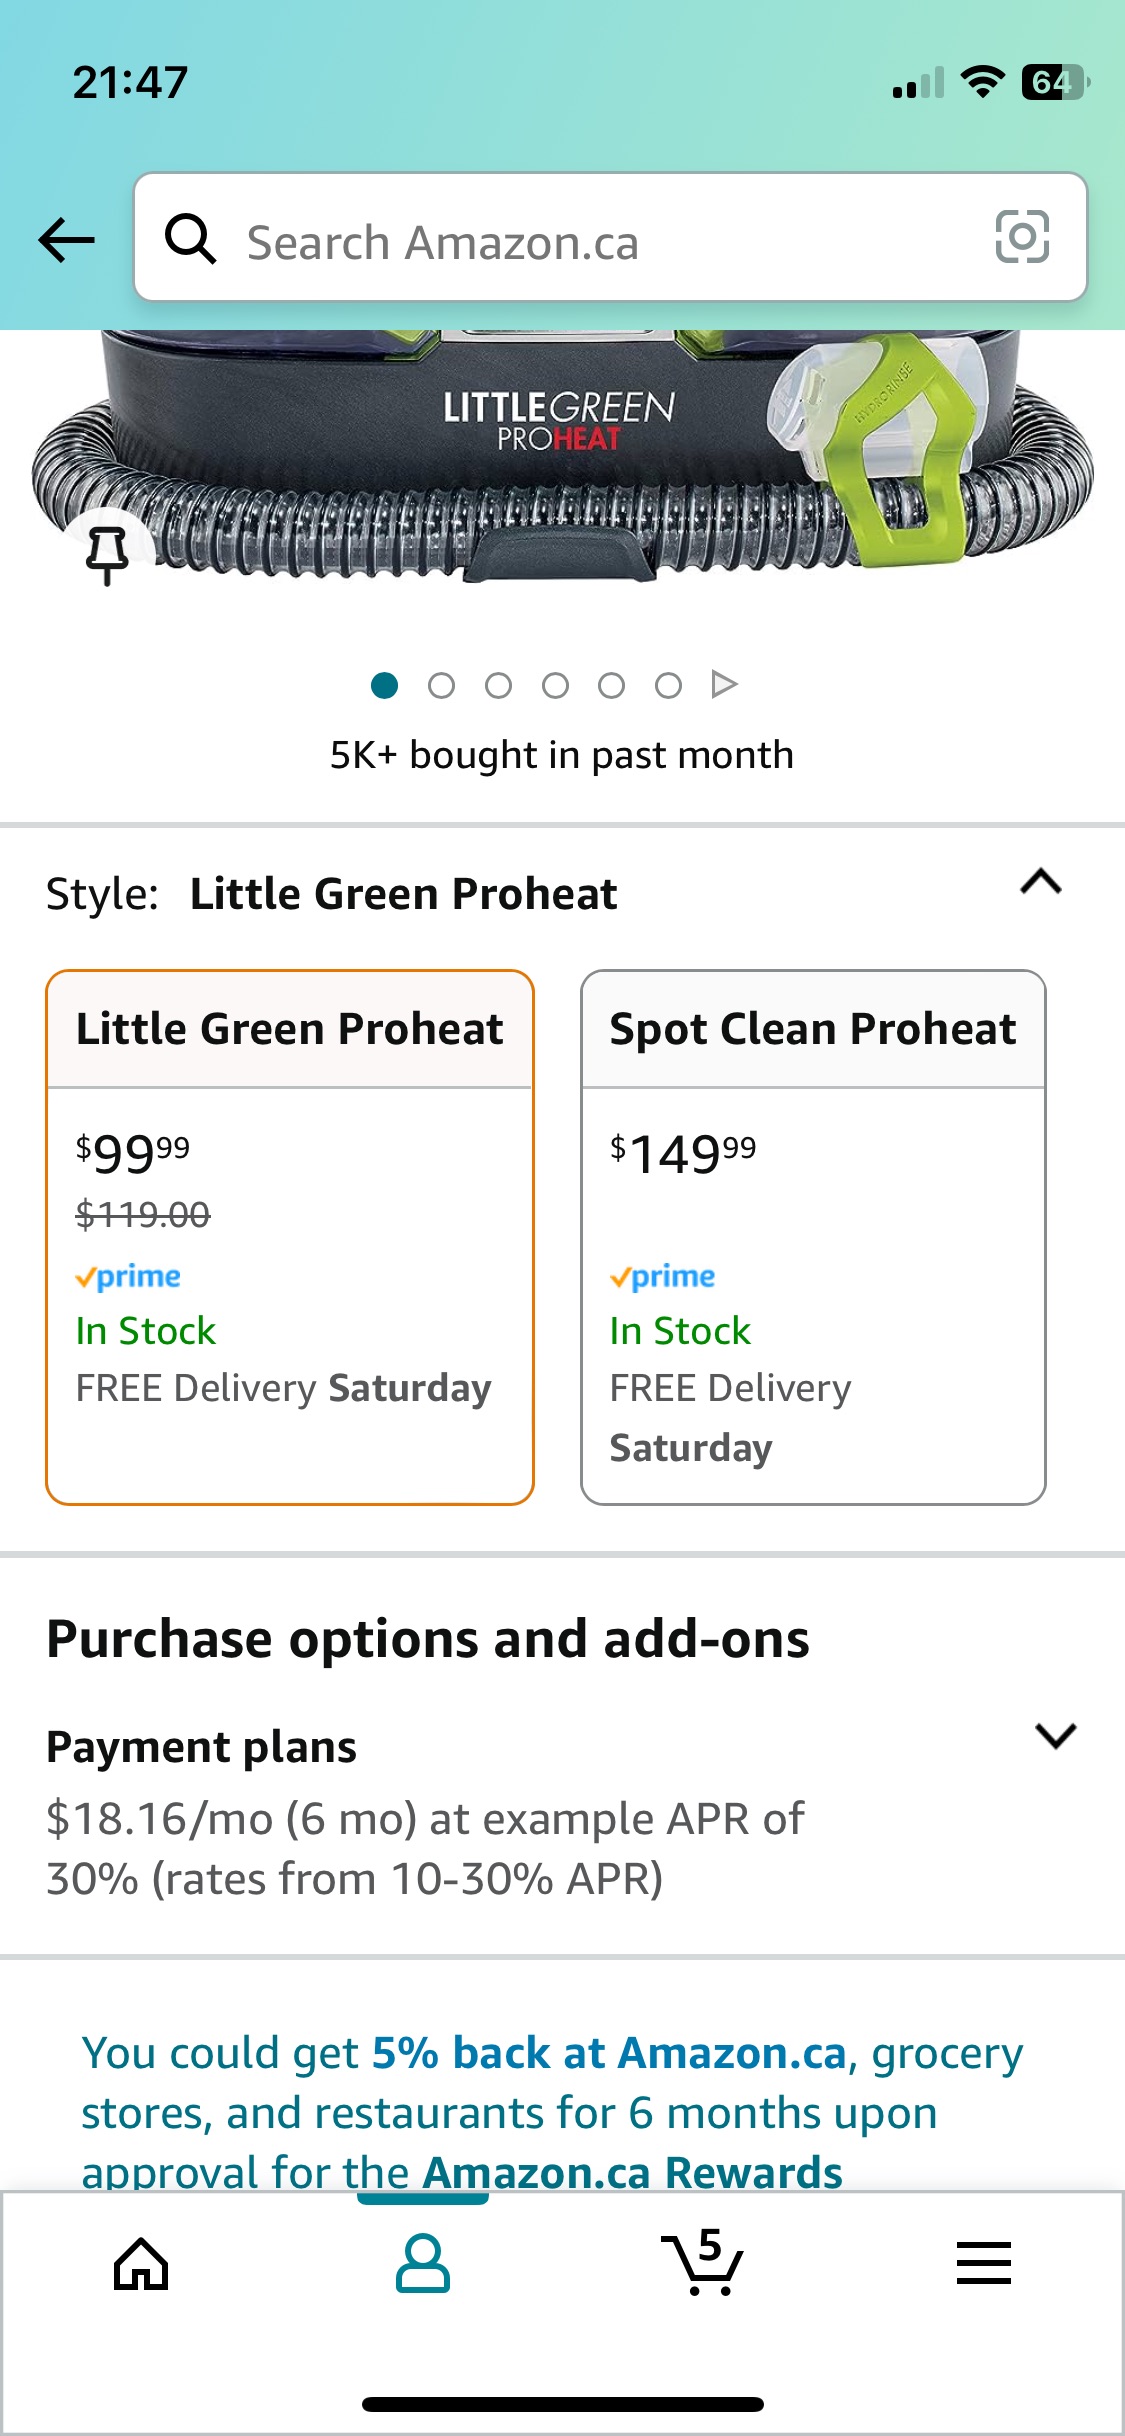 Bissell Little Green Proheat Portable Deep Cleaner/Spot Cleaner with self-Cleaning HydroRinse Tool for Carpet and Upholstery 2513B : Amazon.ca: Home